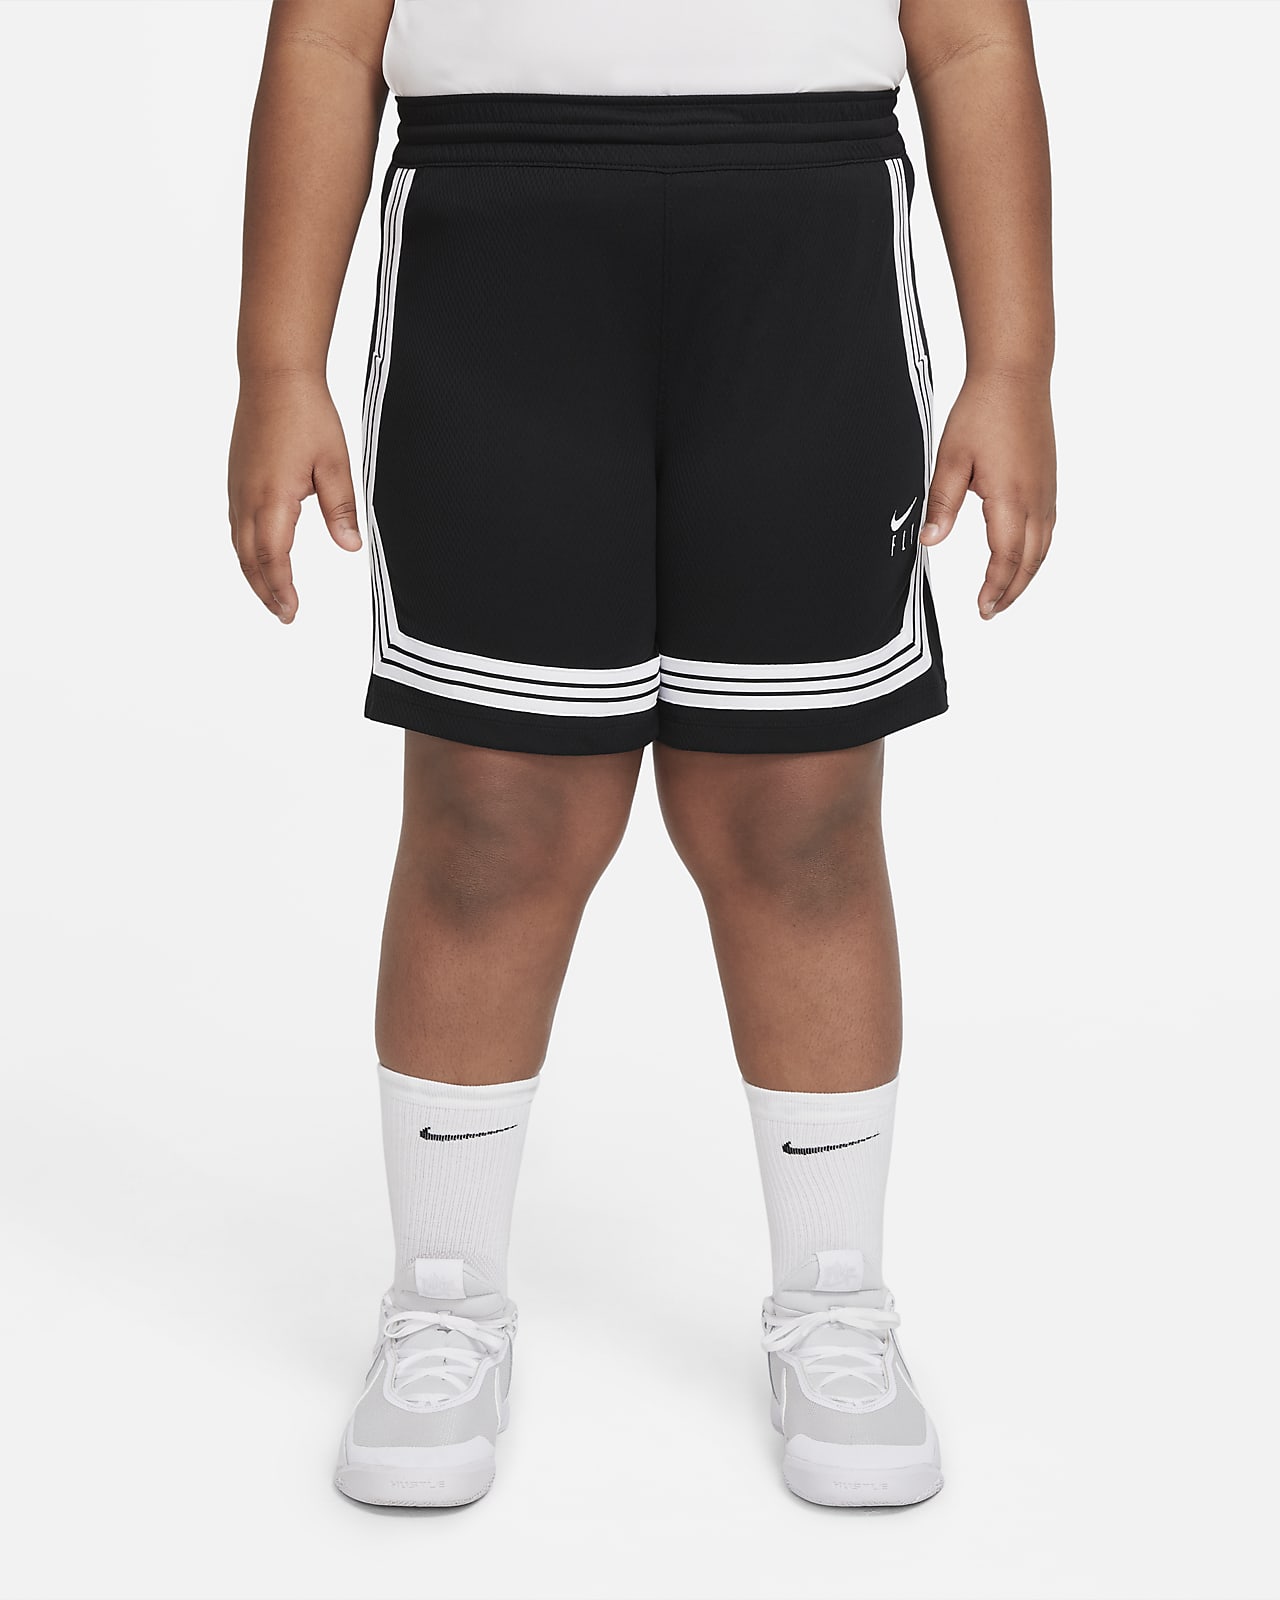 Nike Dri-FIT Fly Crossover Big Kids' (Girls') Basketball Shorts (Extended Size)